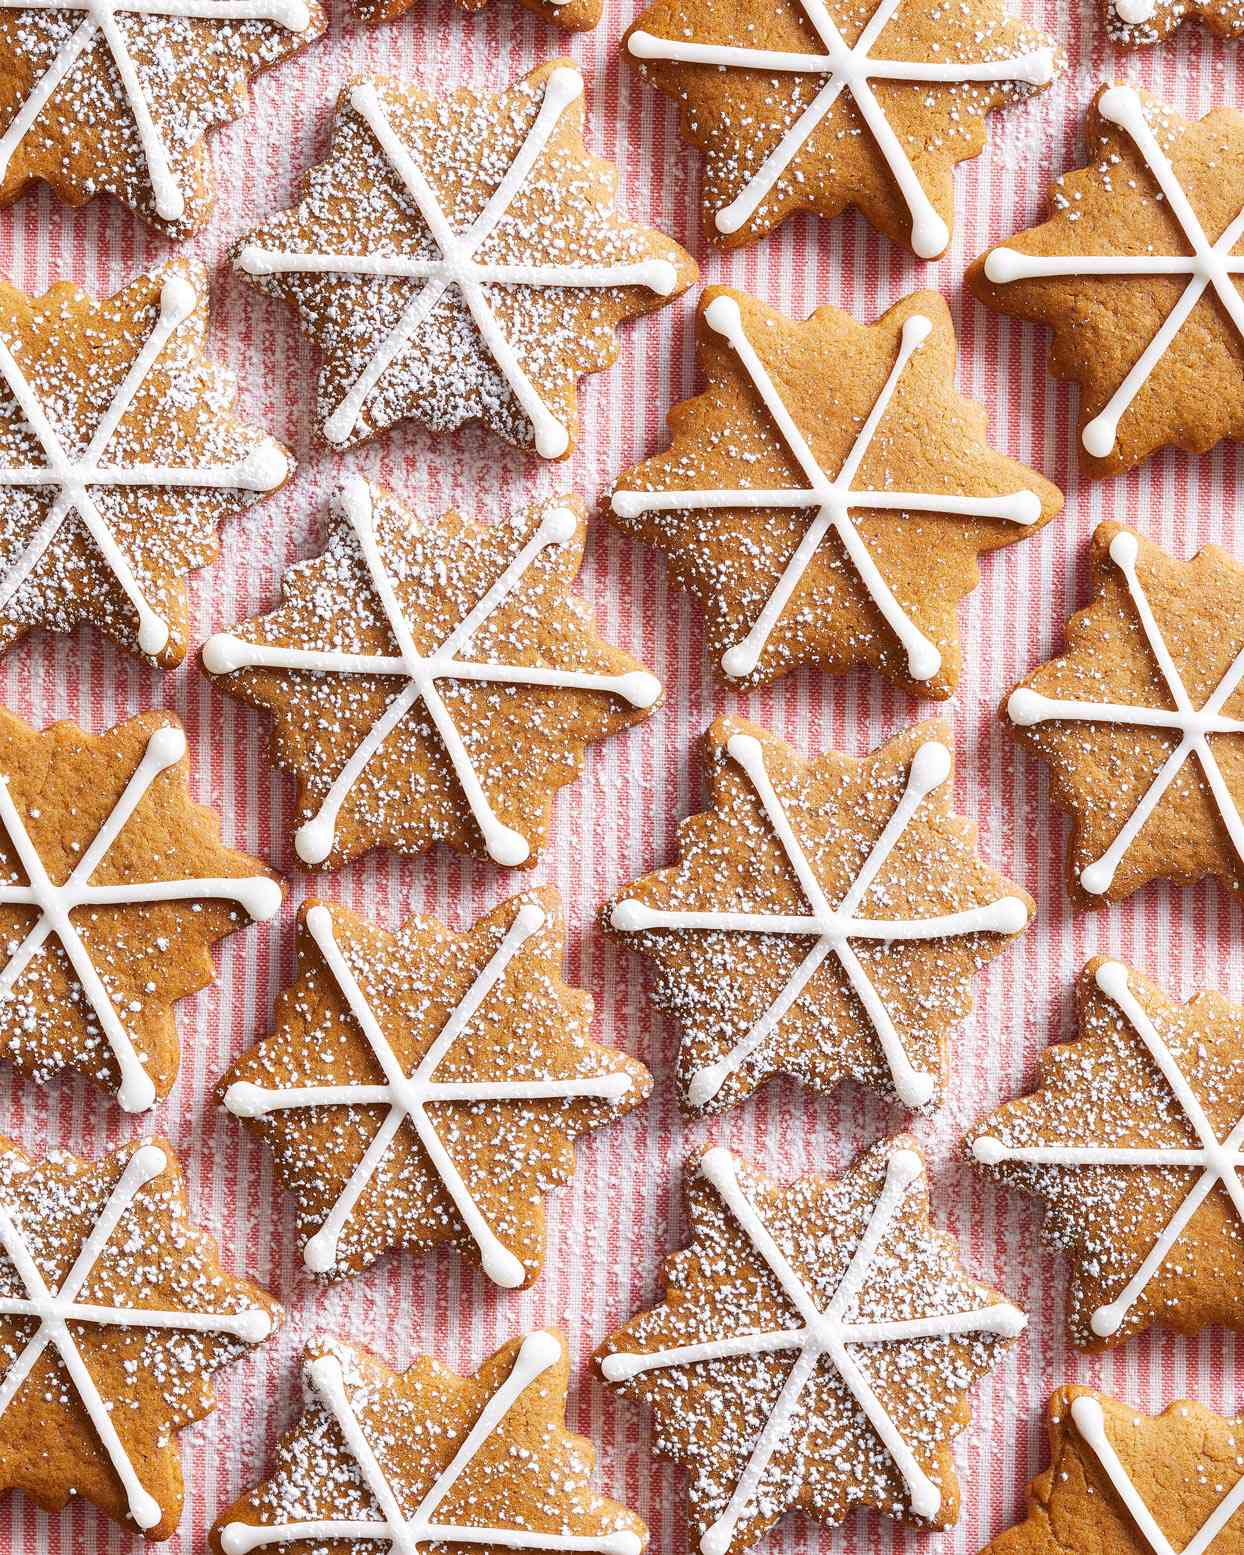 Gingerbread Snowflakes with powdered sugar icing